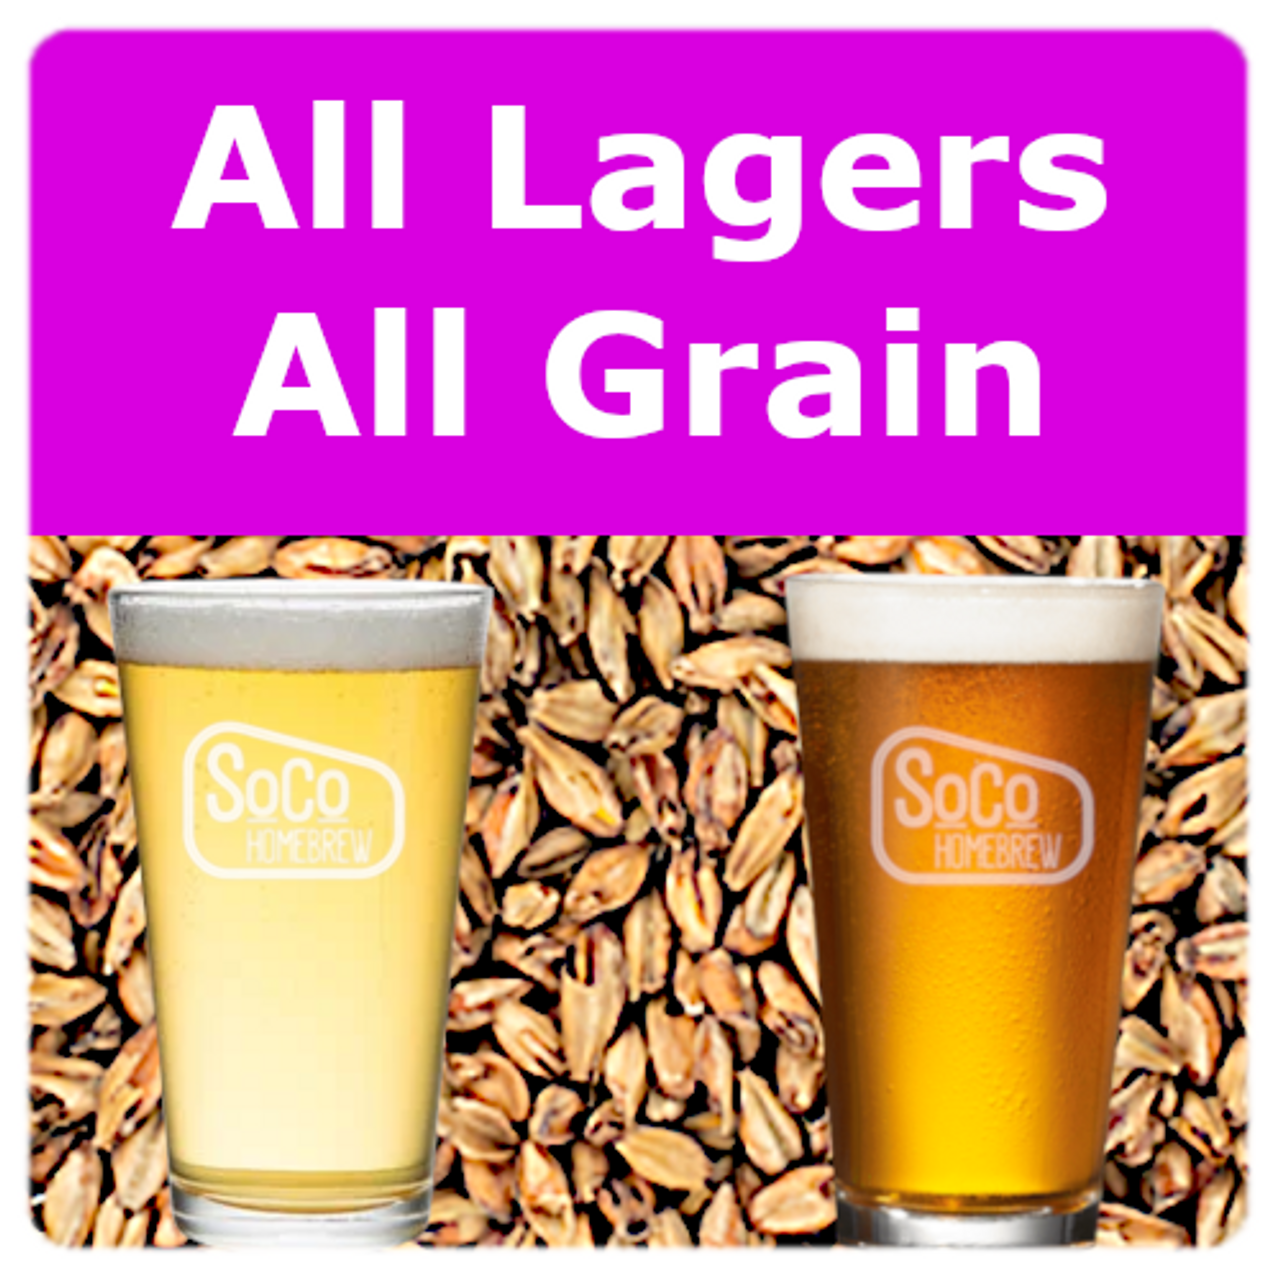 All Lagers - All Grain